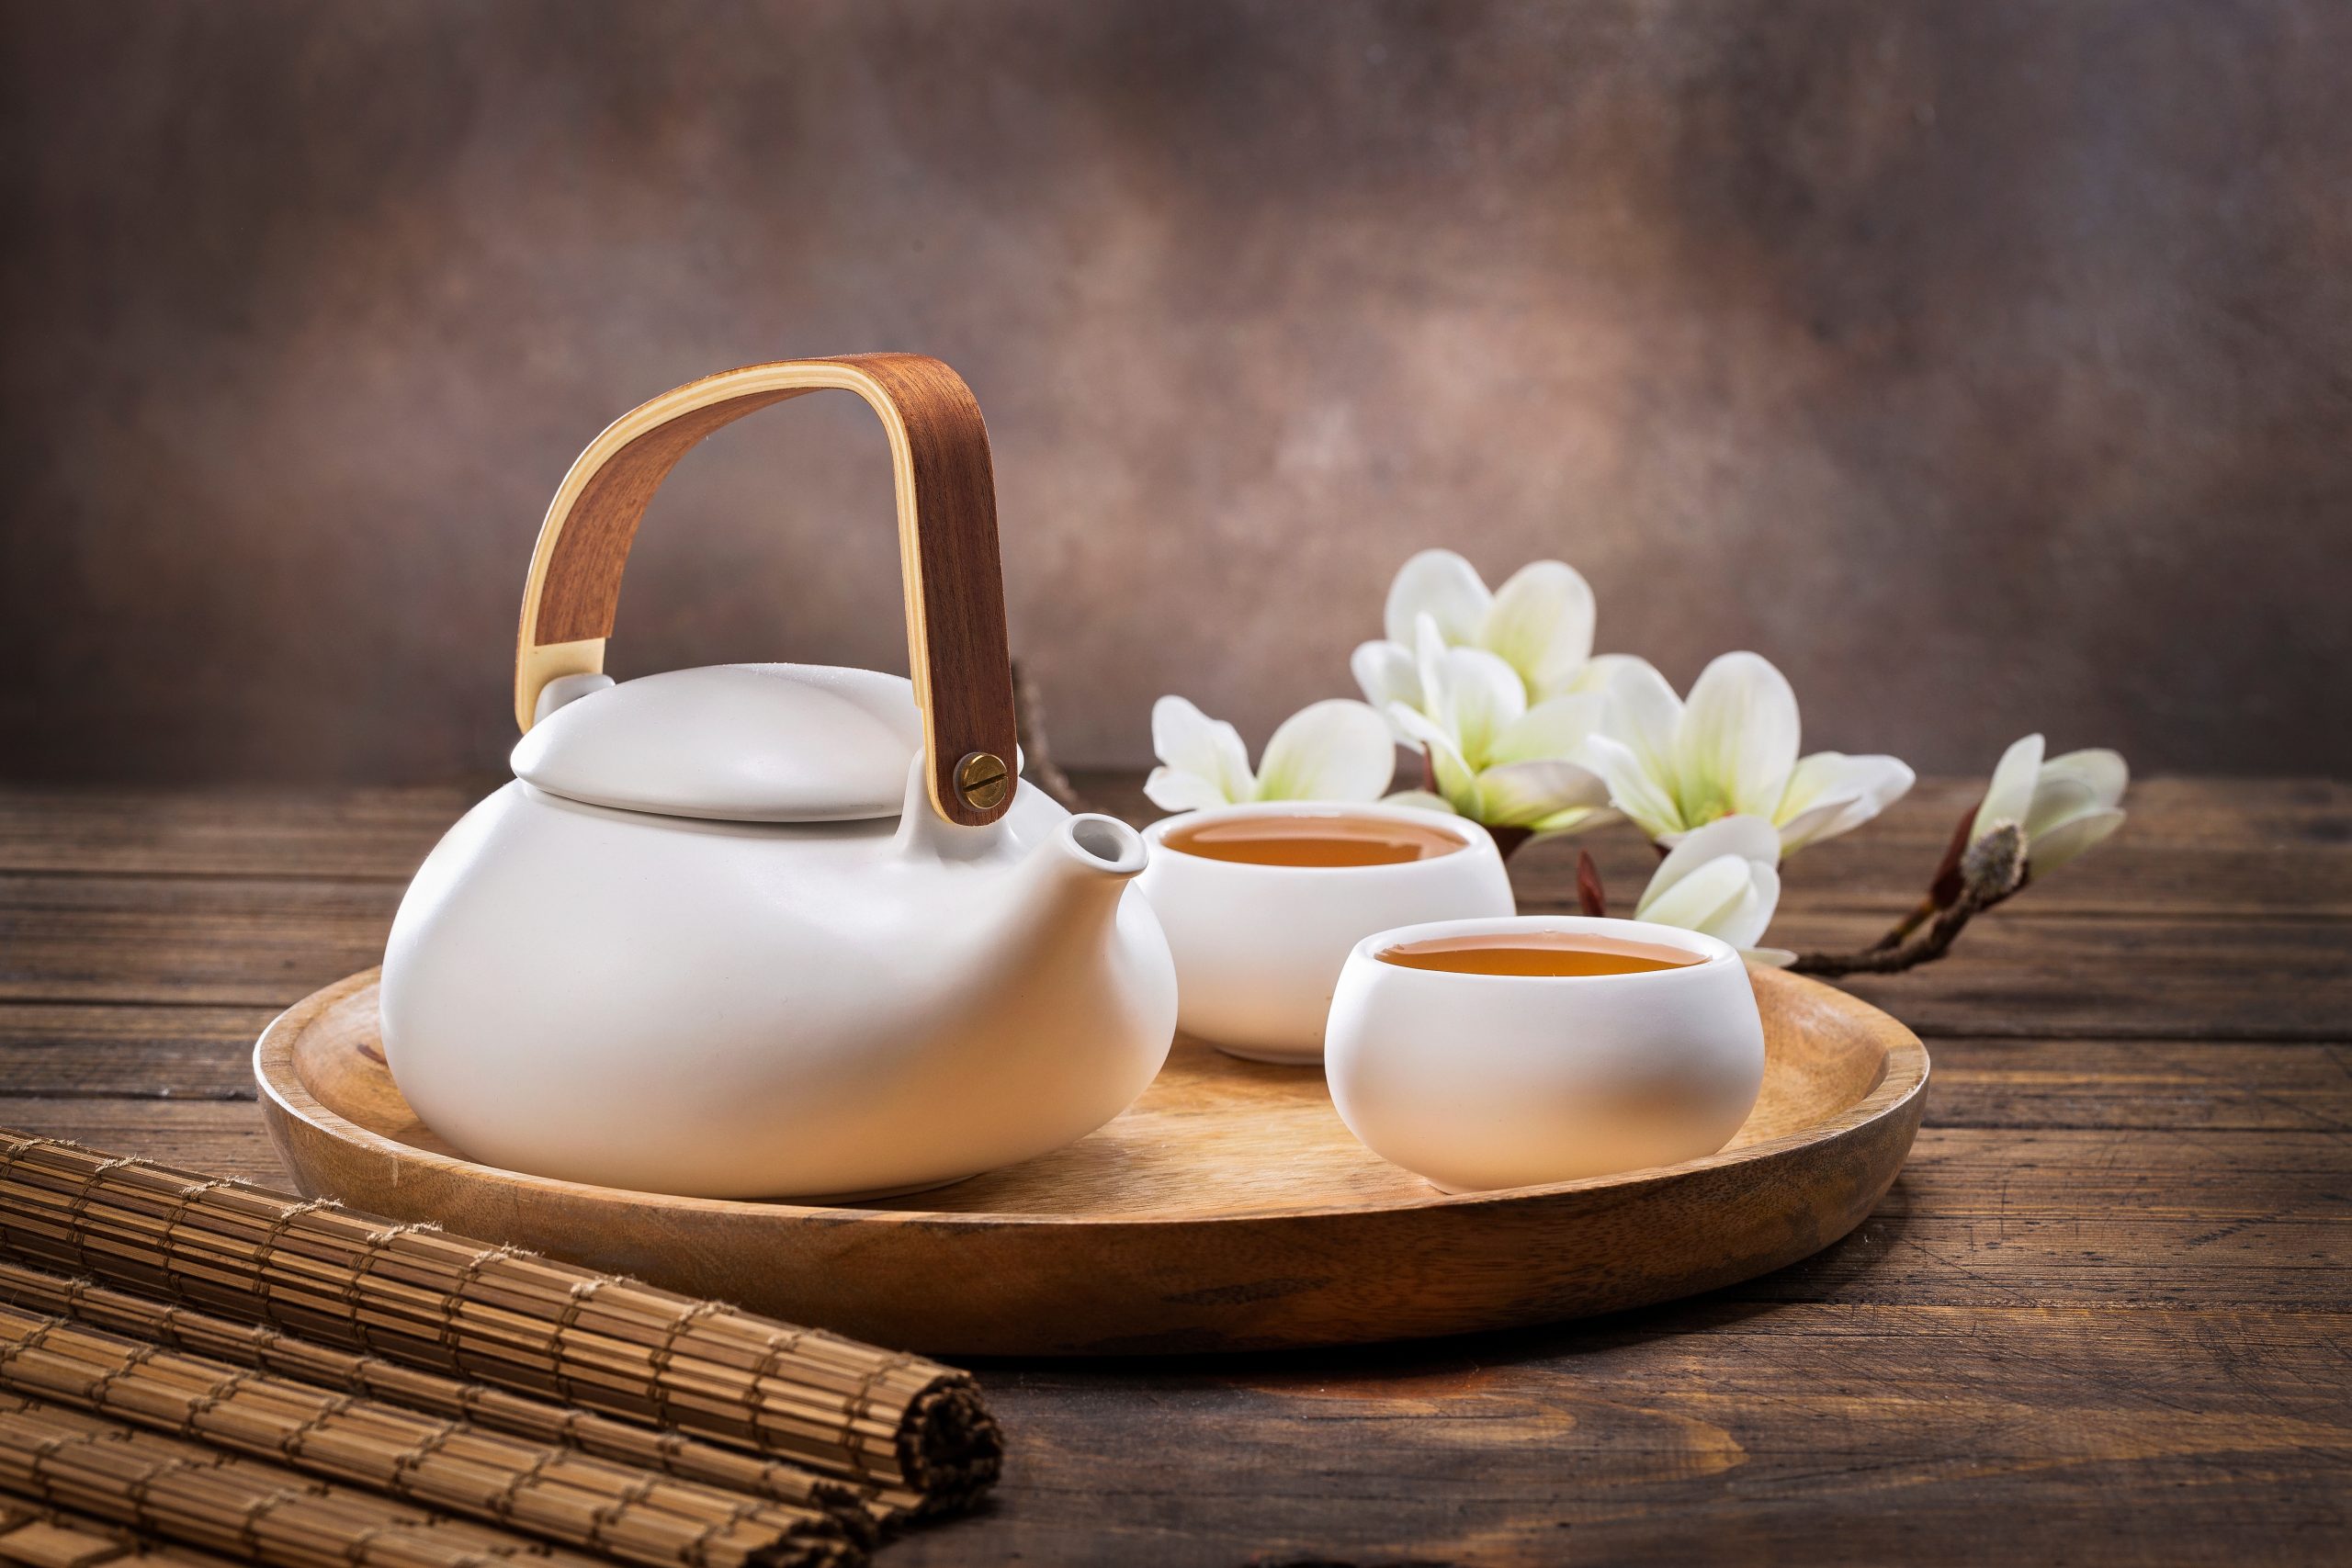 Tea,Concept,With,White,Tea,Set,Of,Cups,And,Teapot